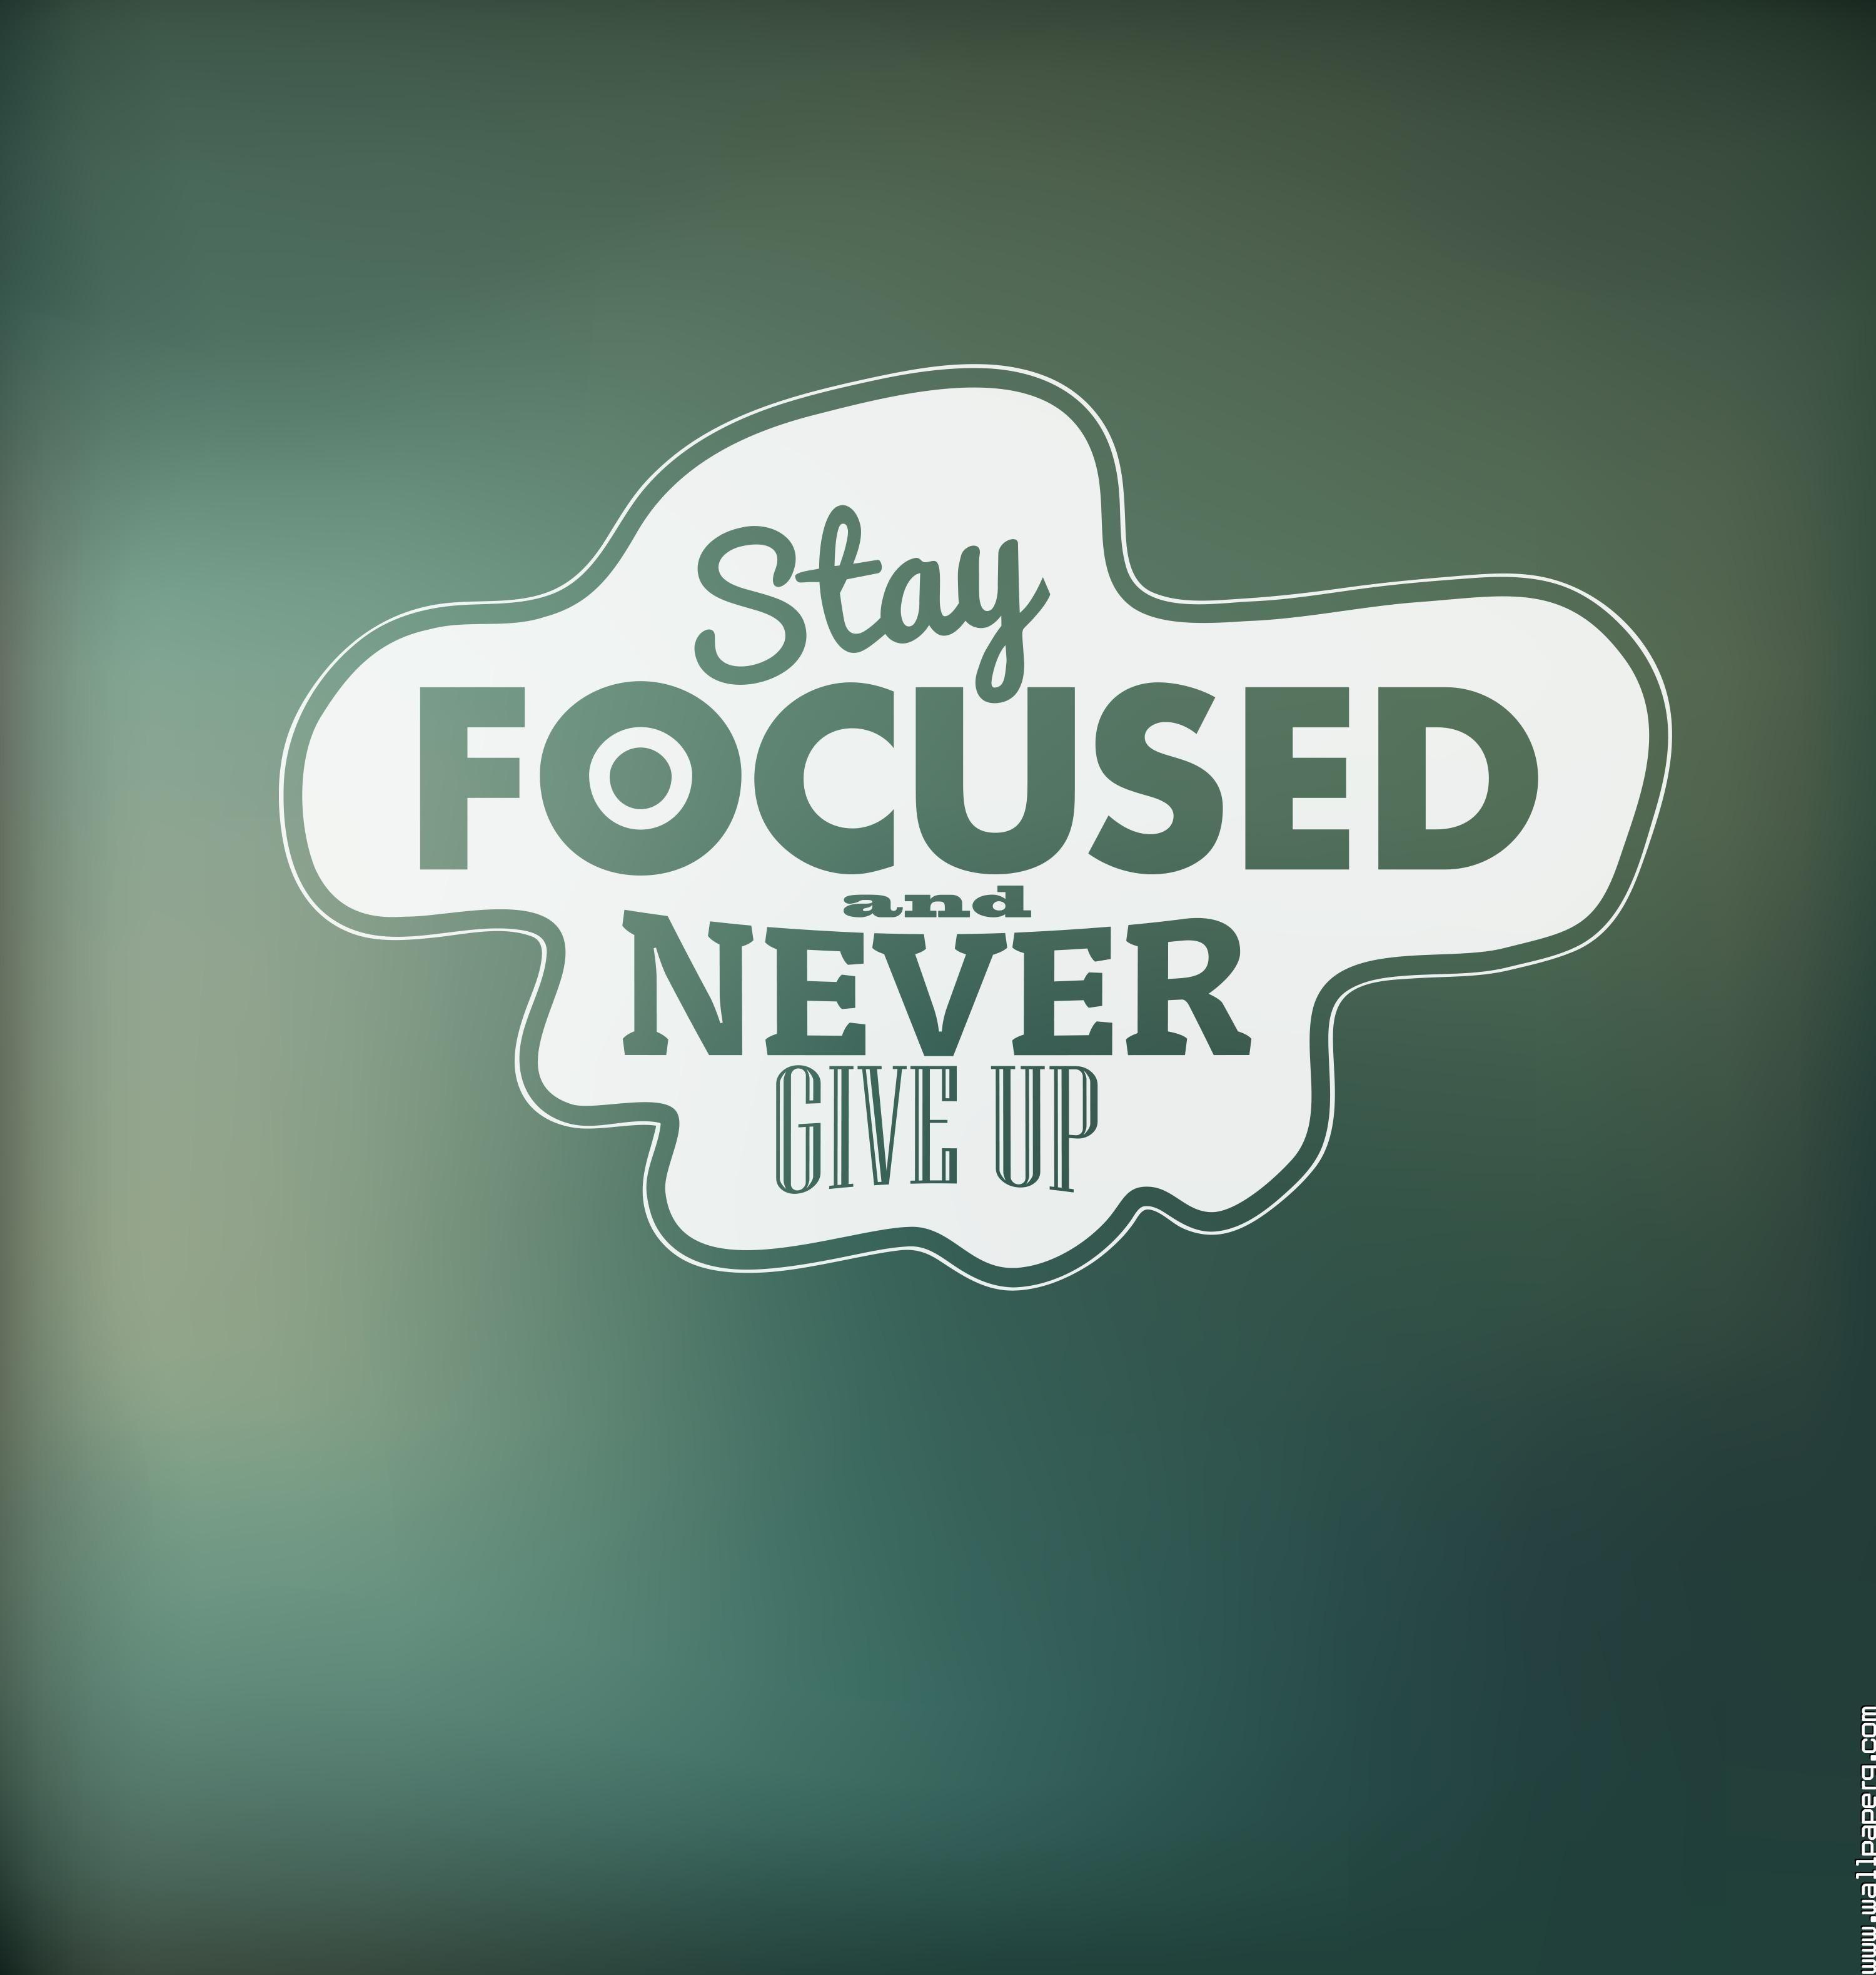 Download Stay focused and never give up motivational quote